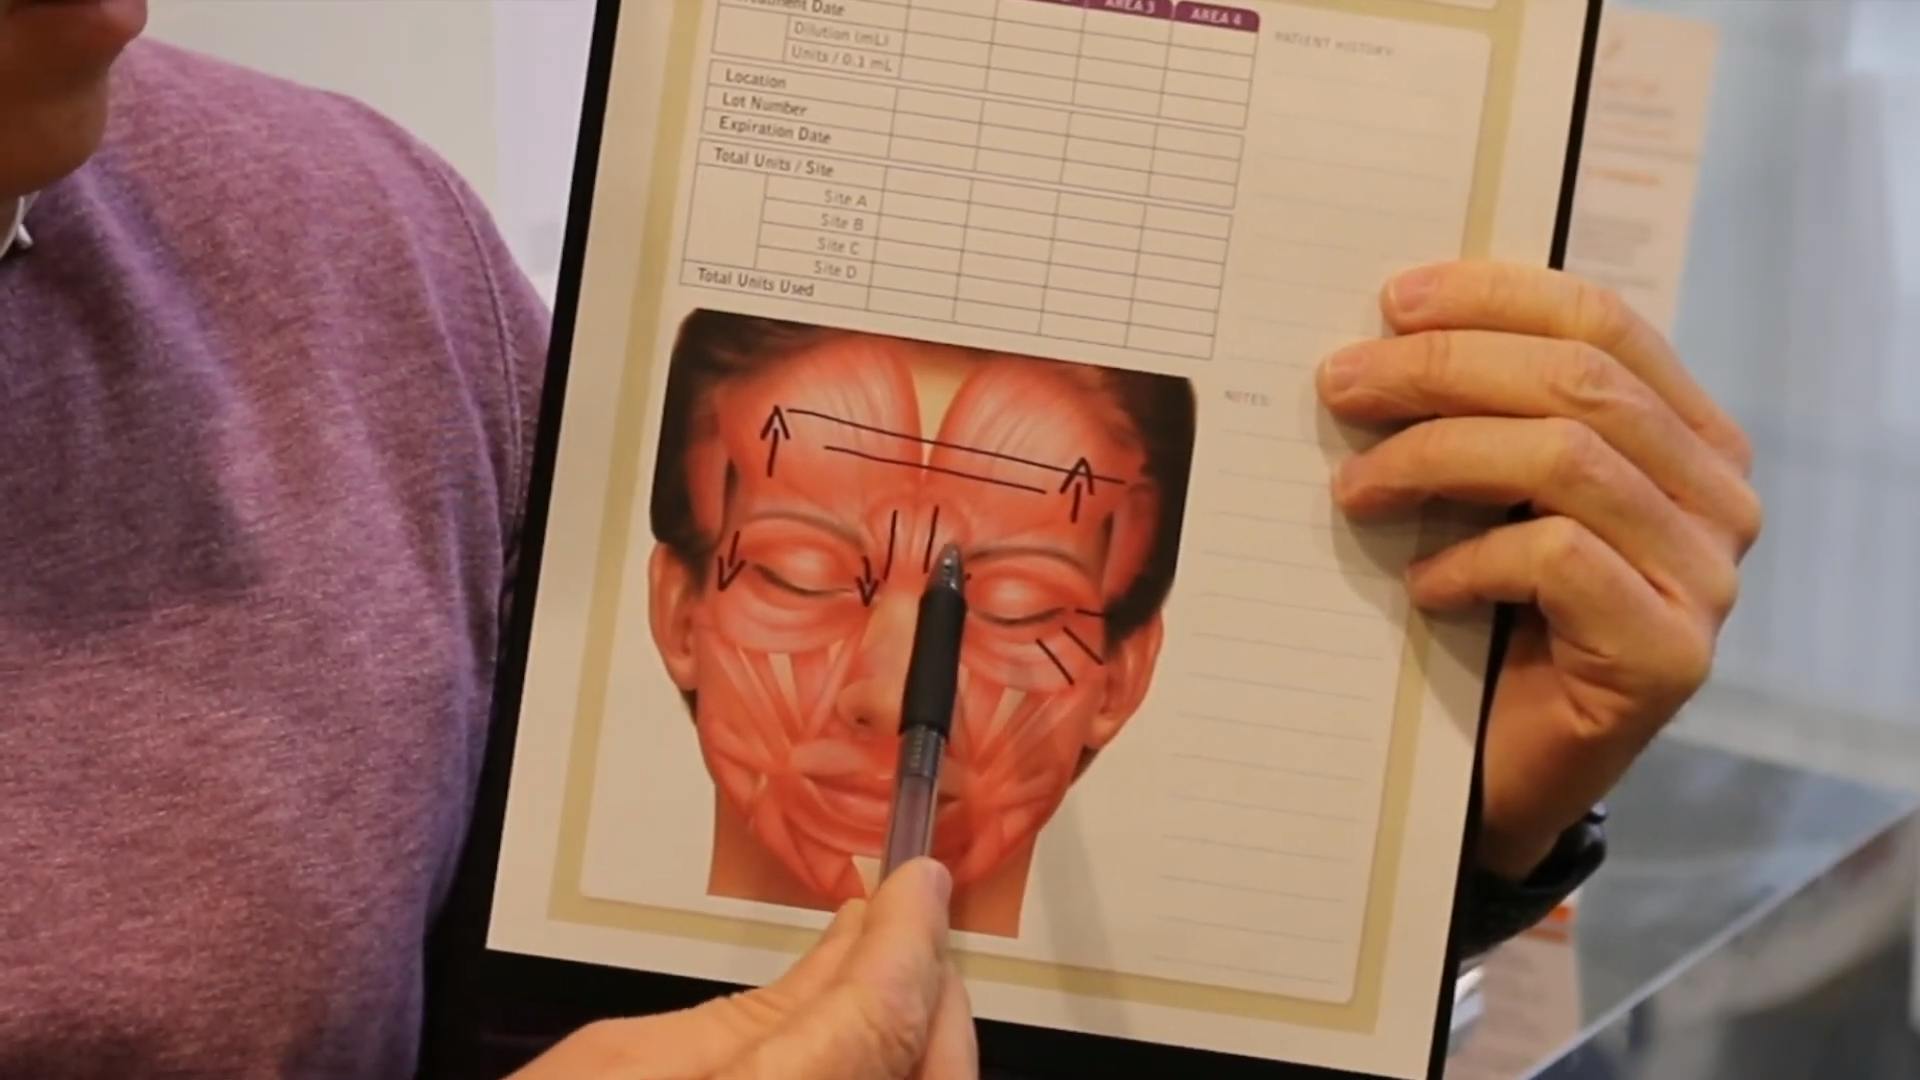 Dr. Moynihan showing someone the anatomy of a human face